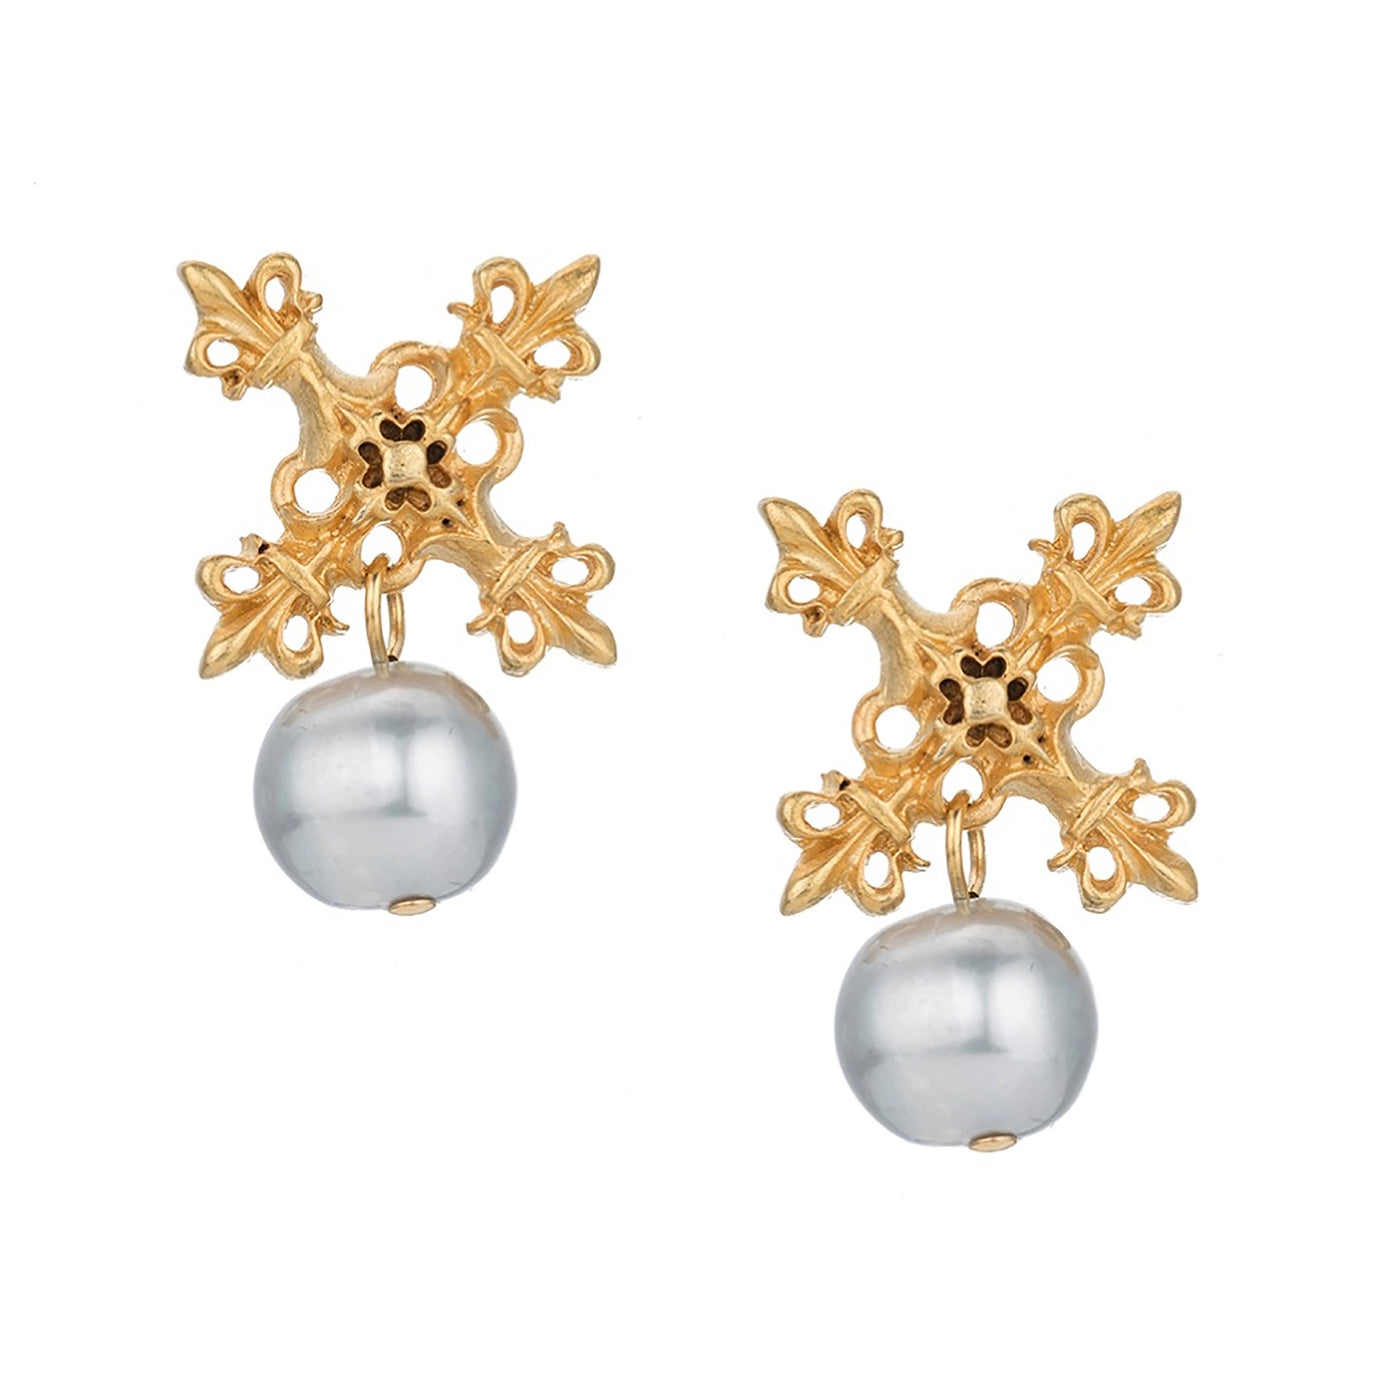 24k Gold Plated "X" Earrings with Silver Freshwater Pearl Dangle